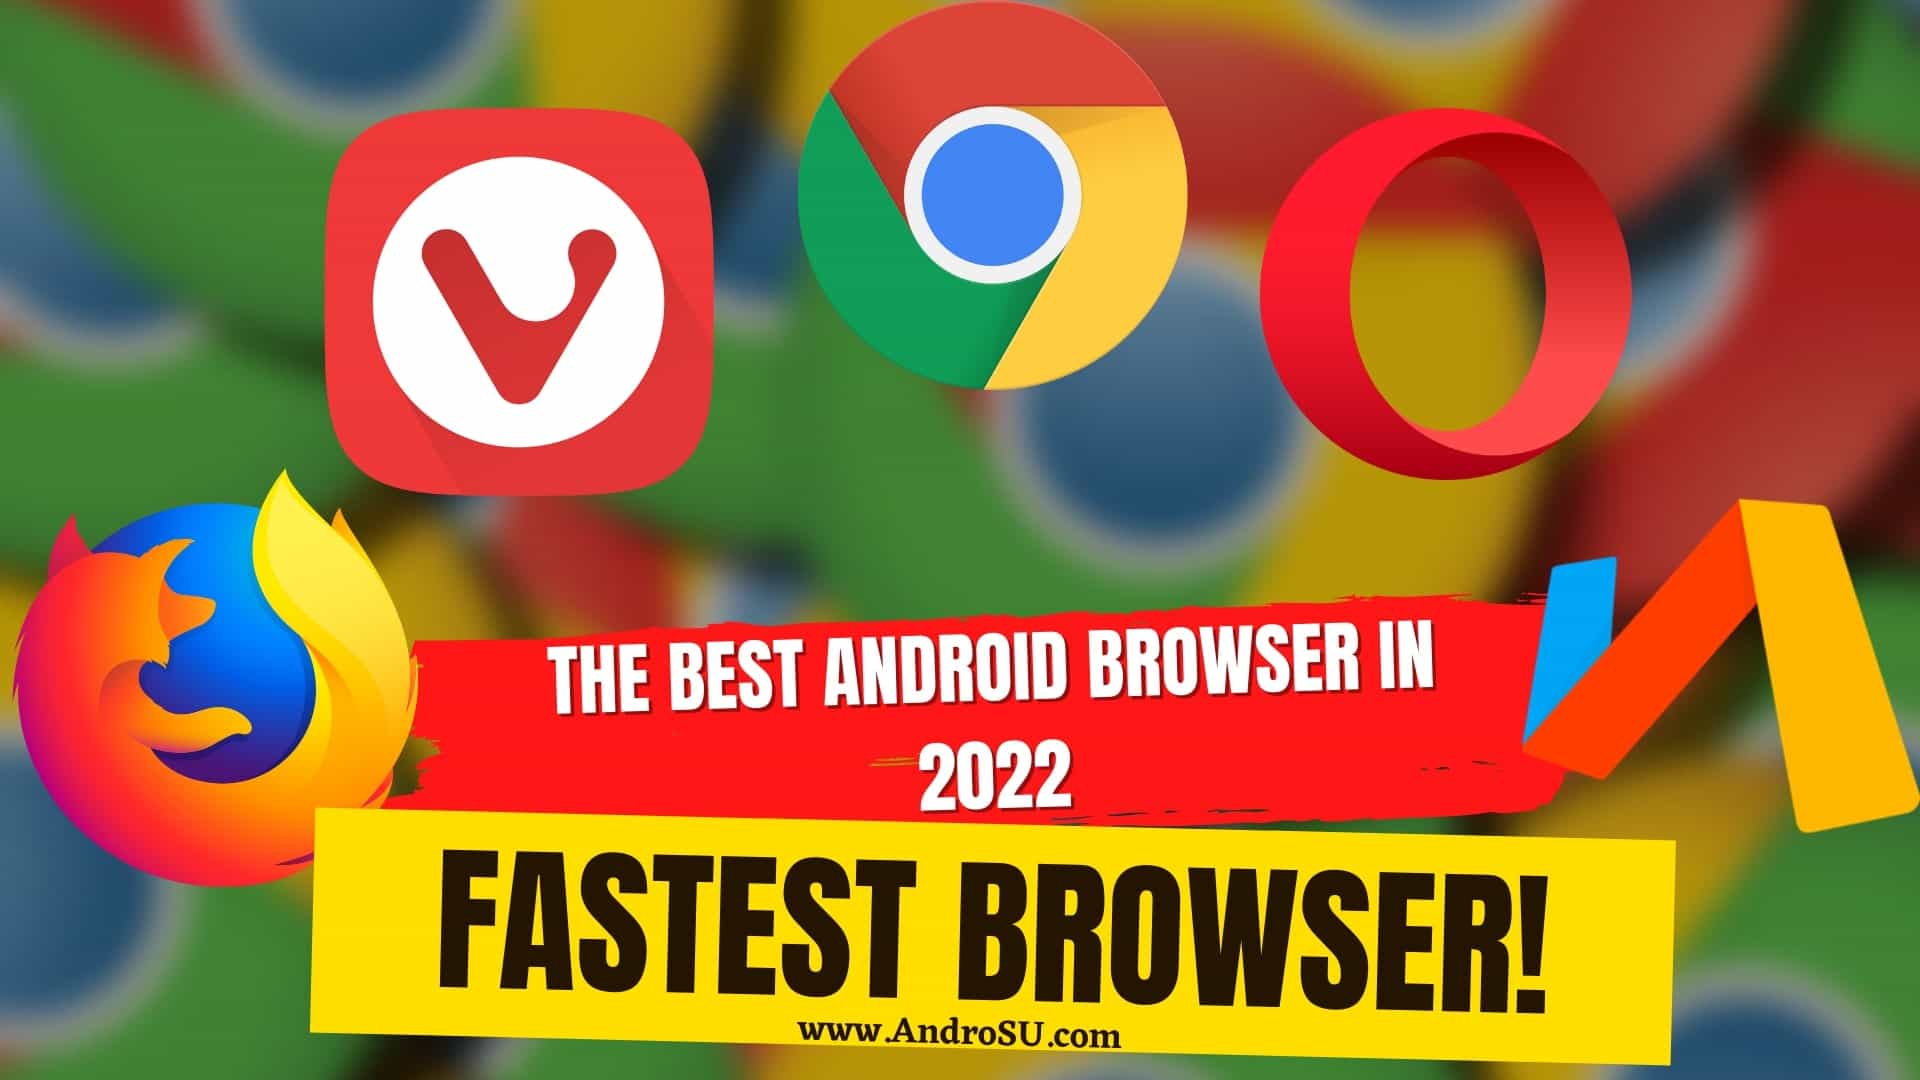 Best Android Browser, Best Android Browser 2022, Latest Android Browser 2022